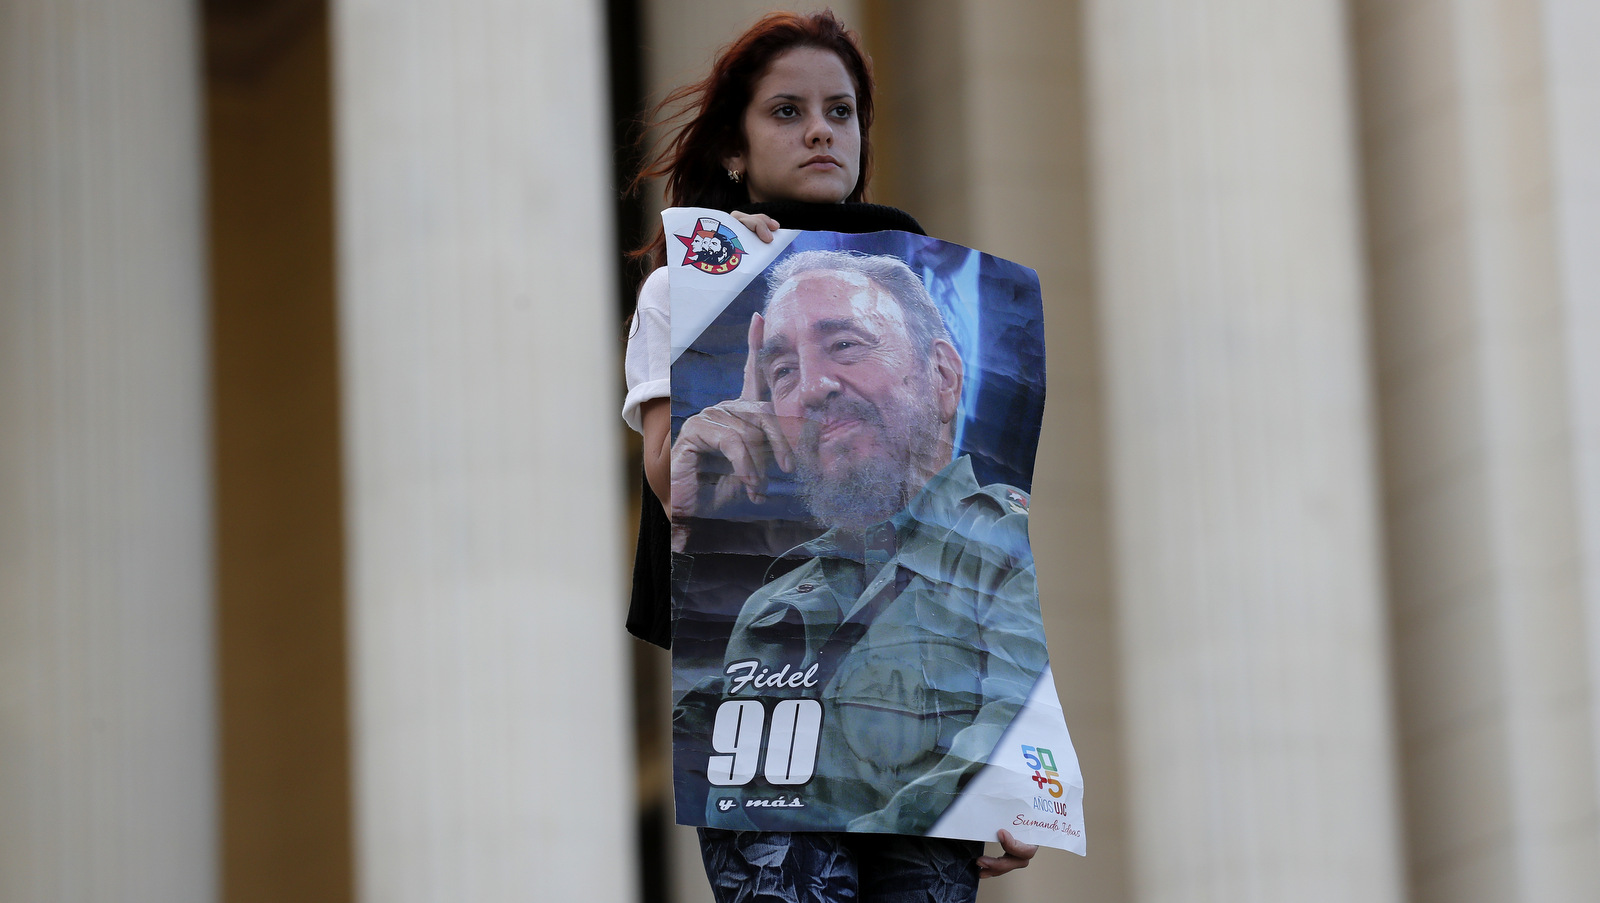 A student stands at attention holding images of Fidel Castro at the university where Castro studied law as a young man, during a vigil in Havana, Cuba, Sunday, Nov. 27, 2016. Castro, who led a rebel army to improbable victory in Cuba, embraced Soviet-style communism and defied the power of U.S. presidents during his half century rule, died Friday at age 90. (AP Photo/ Dario Lopez-Mills)